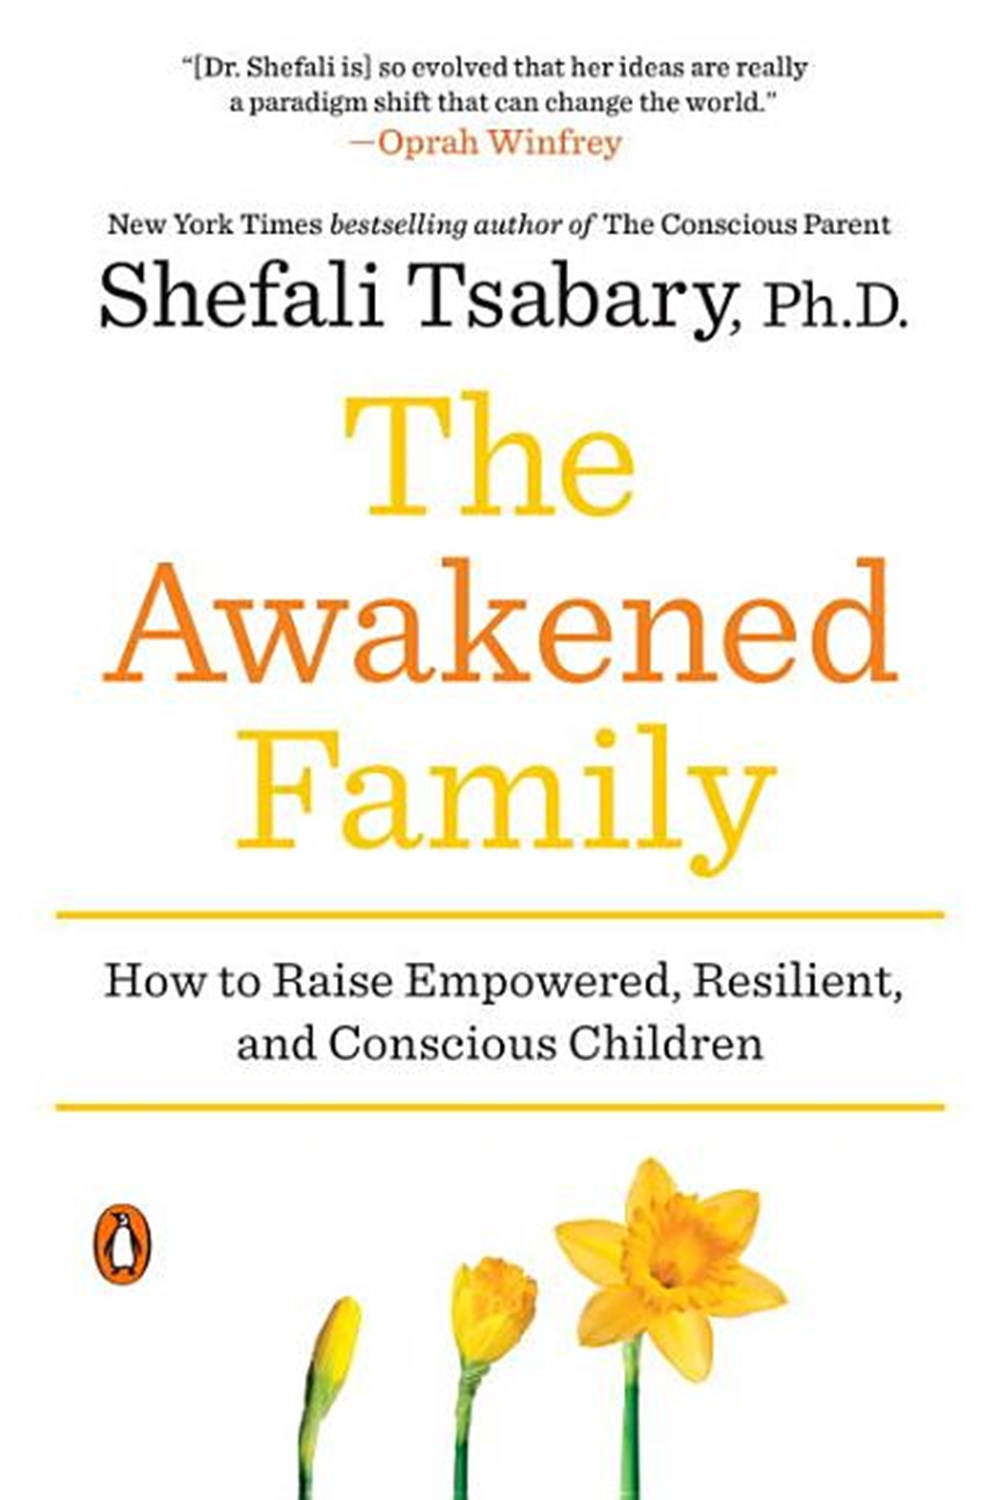 Awakened Family How to Raise Empowered, Resilient, and Conscious Children